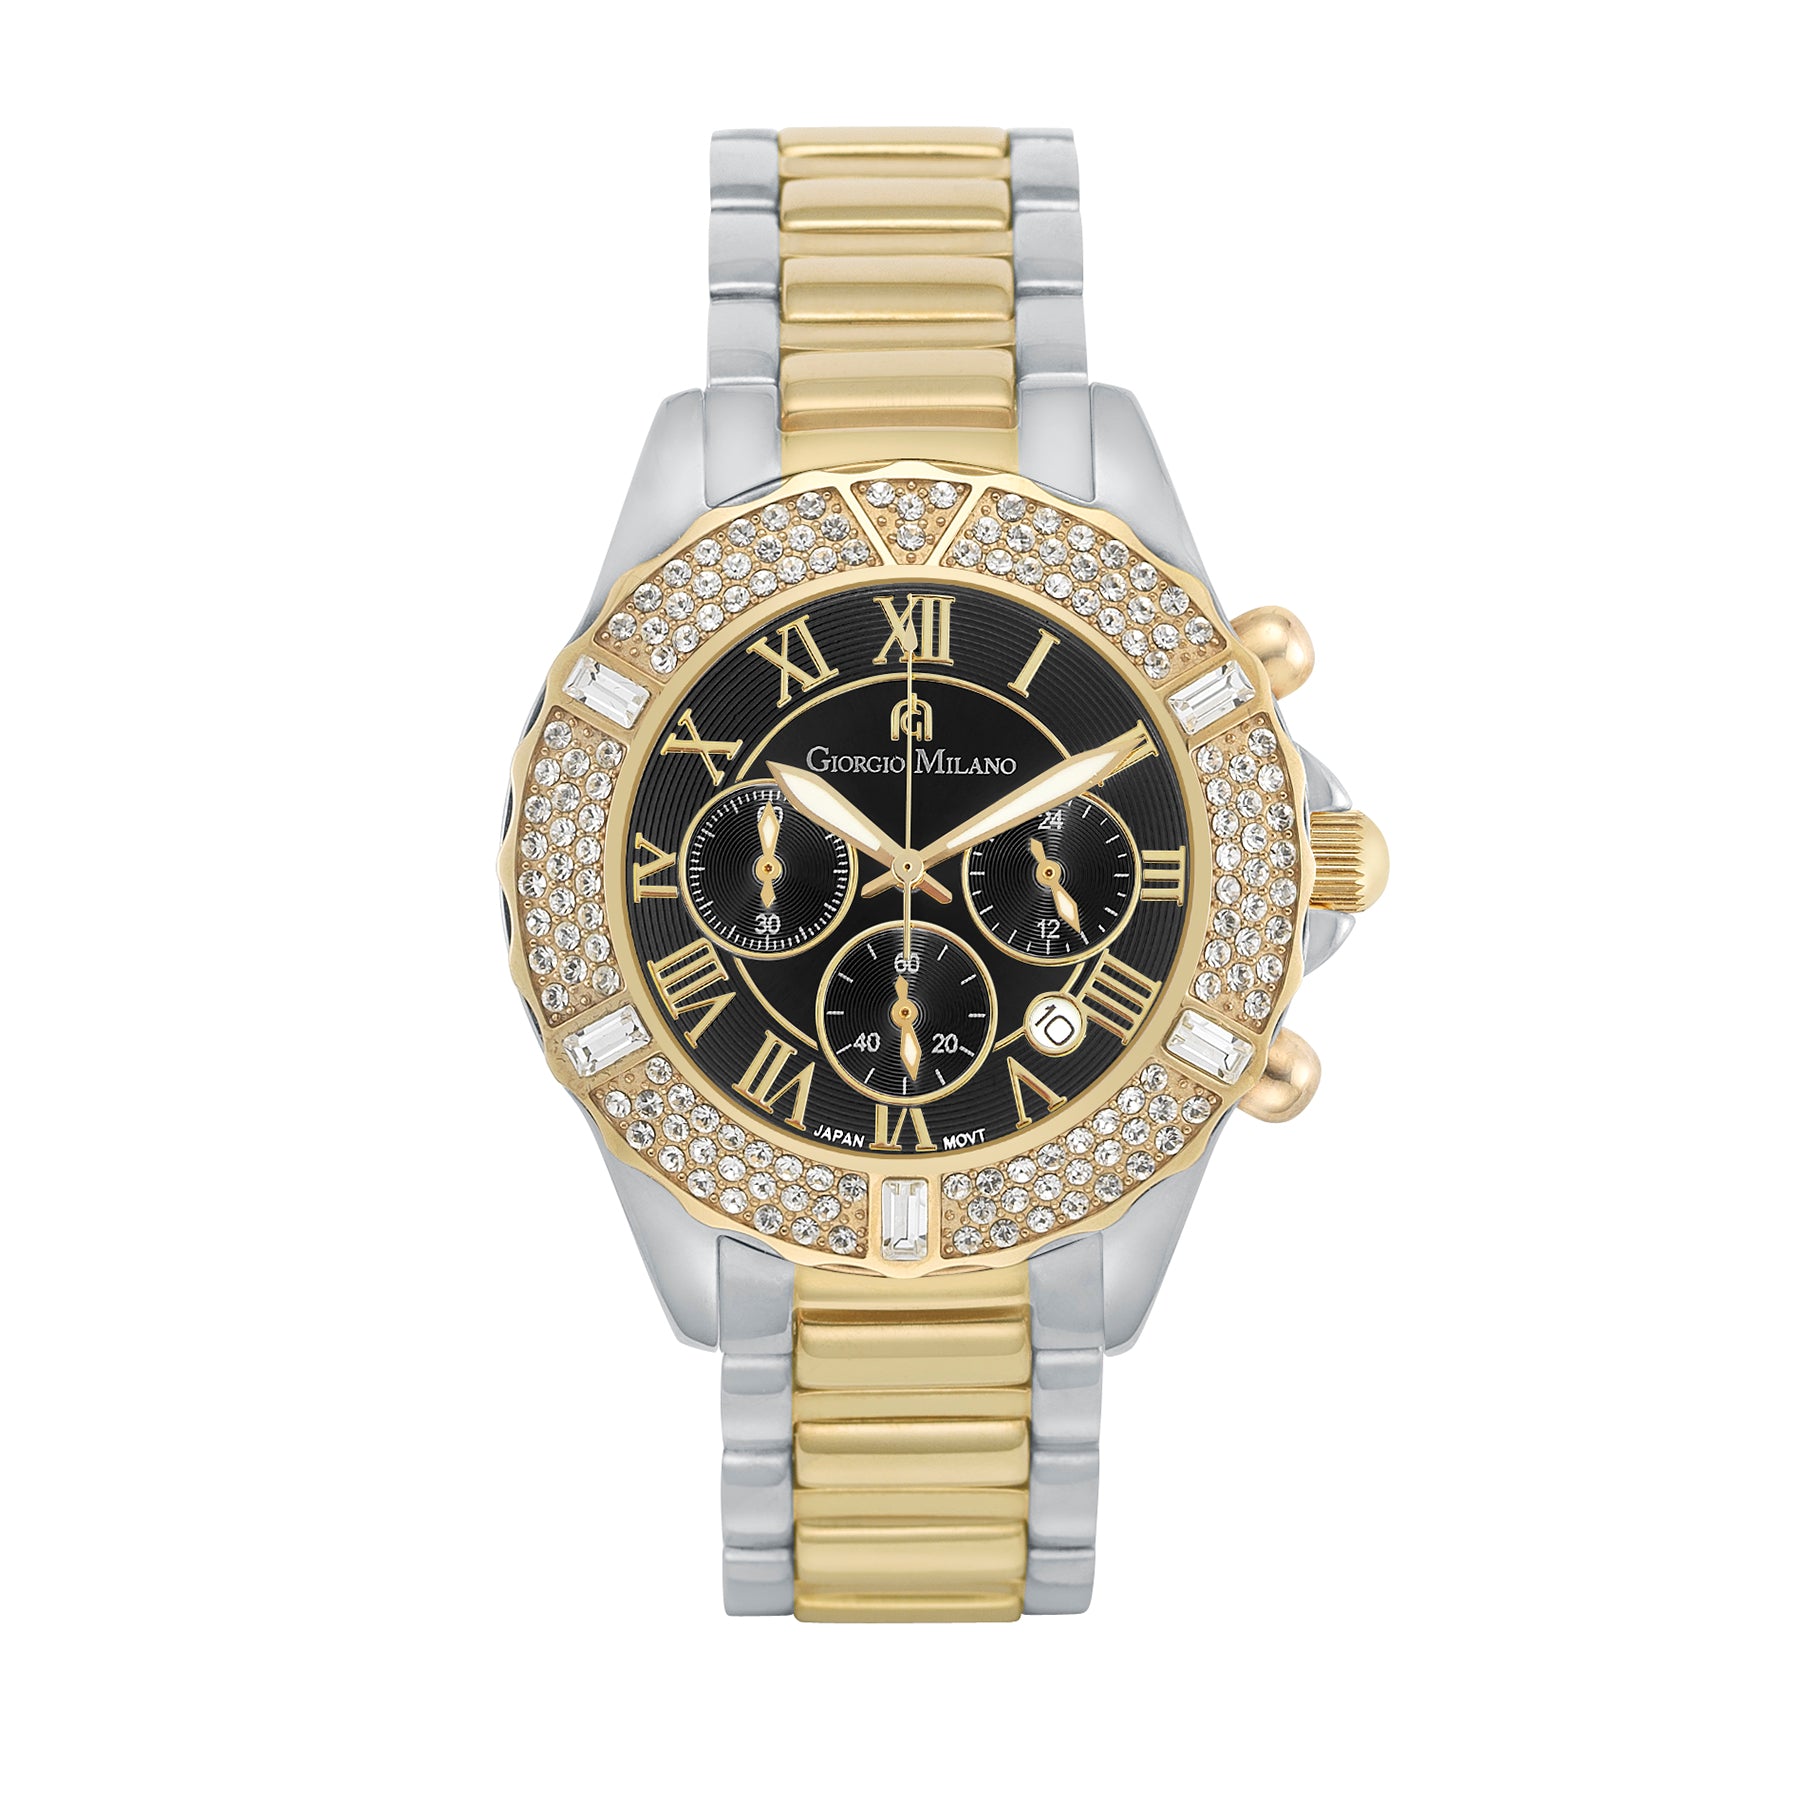 PAULINA - 738 elegant evening womens chronograph black dial gold accents silver watch body link bracelet